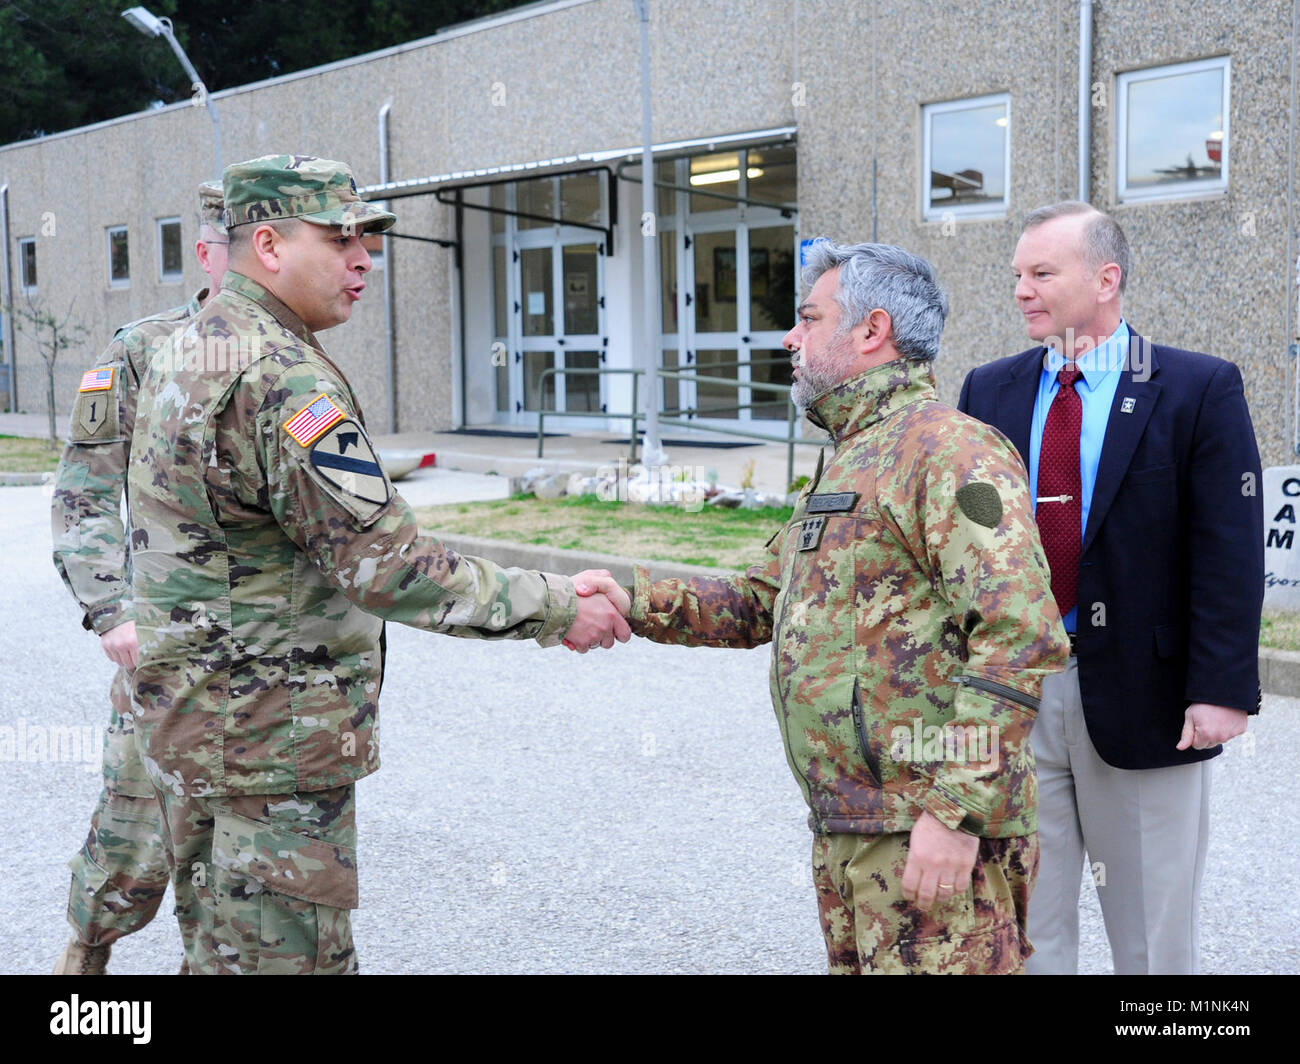 (From left) U.S. Army Lt. Col. Ismael B. Natividad, Training Support Activity Europe (TSAE) Director, greets Italian Army Col. Marco Becherini, Folgore (ABN) Brigade Training Center Commander and James V. Matheson, Regional Training Support Division South Chief, 7th Army Training Command, during the TSAE Director visit at Lustrissimi Training Area, Livorno, Italy, Jan 30, 2018.( Stock Photo